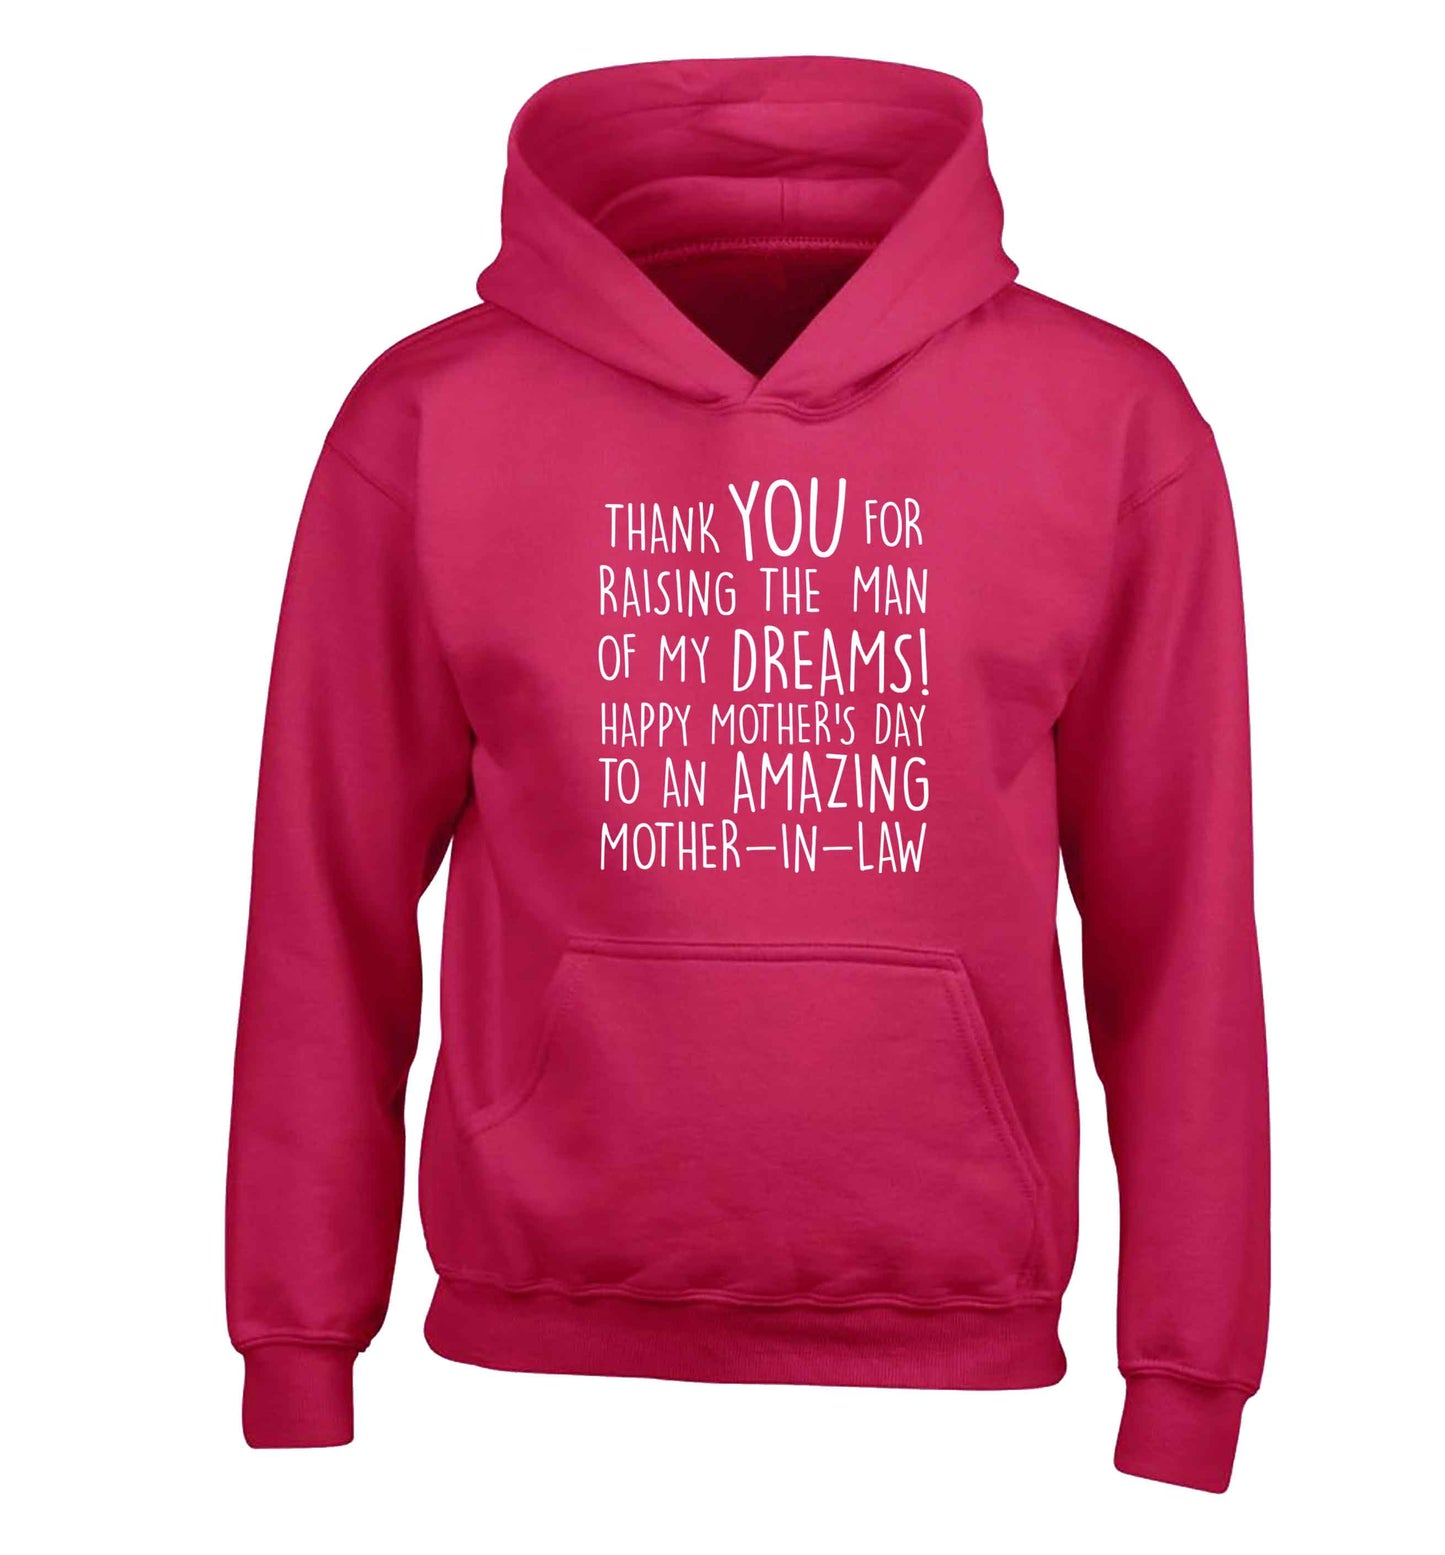 Raising the man of my dreams mother's day mother-in-law children's pink hoodie 12-13 Years